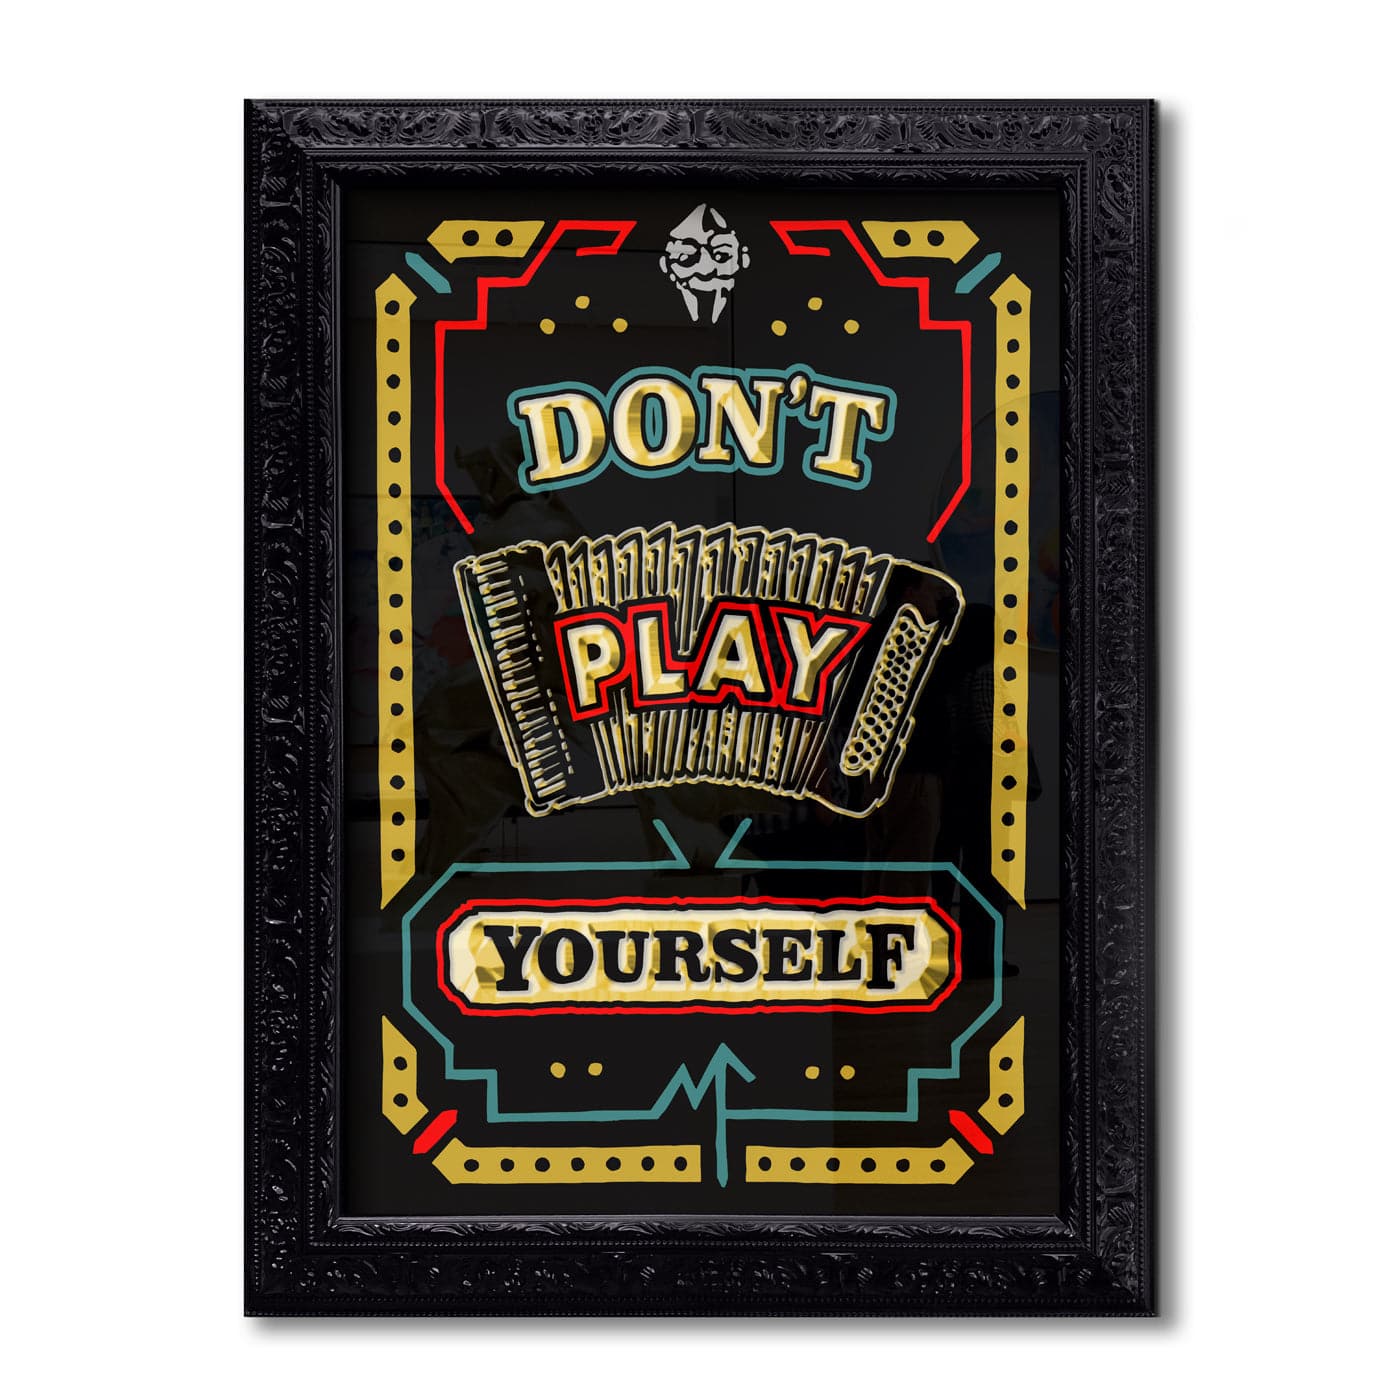 Image of Don't Play Yourself artwork by Ryan Callanan aka RYCA, free delivery